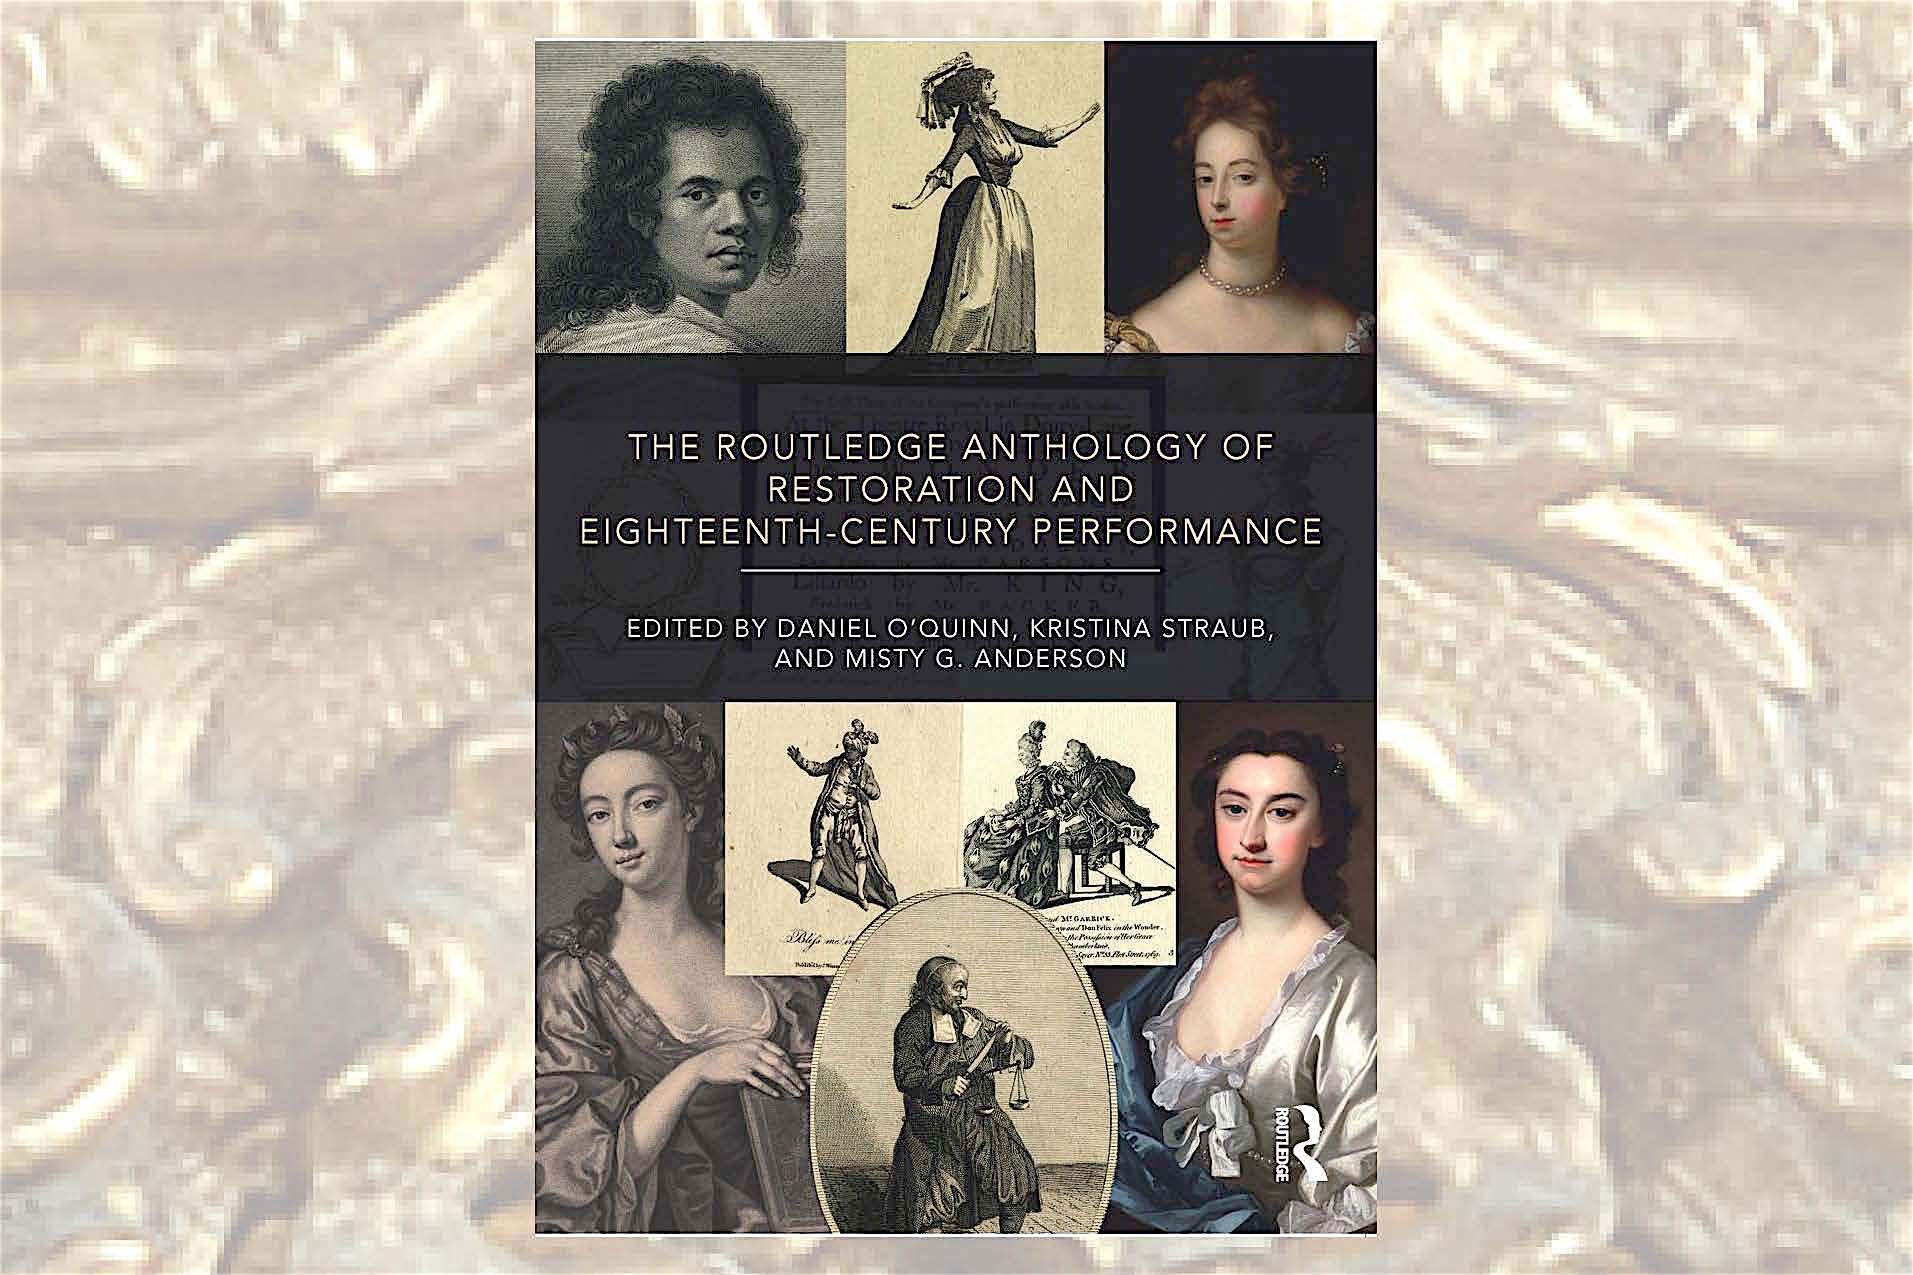 Cover of the Routledge Anthology edited by faculty member Kristina Straub.